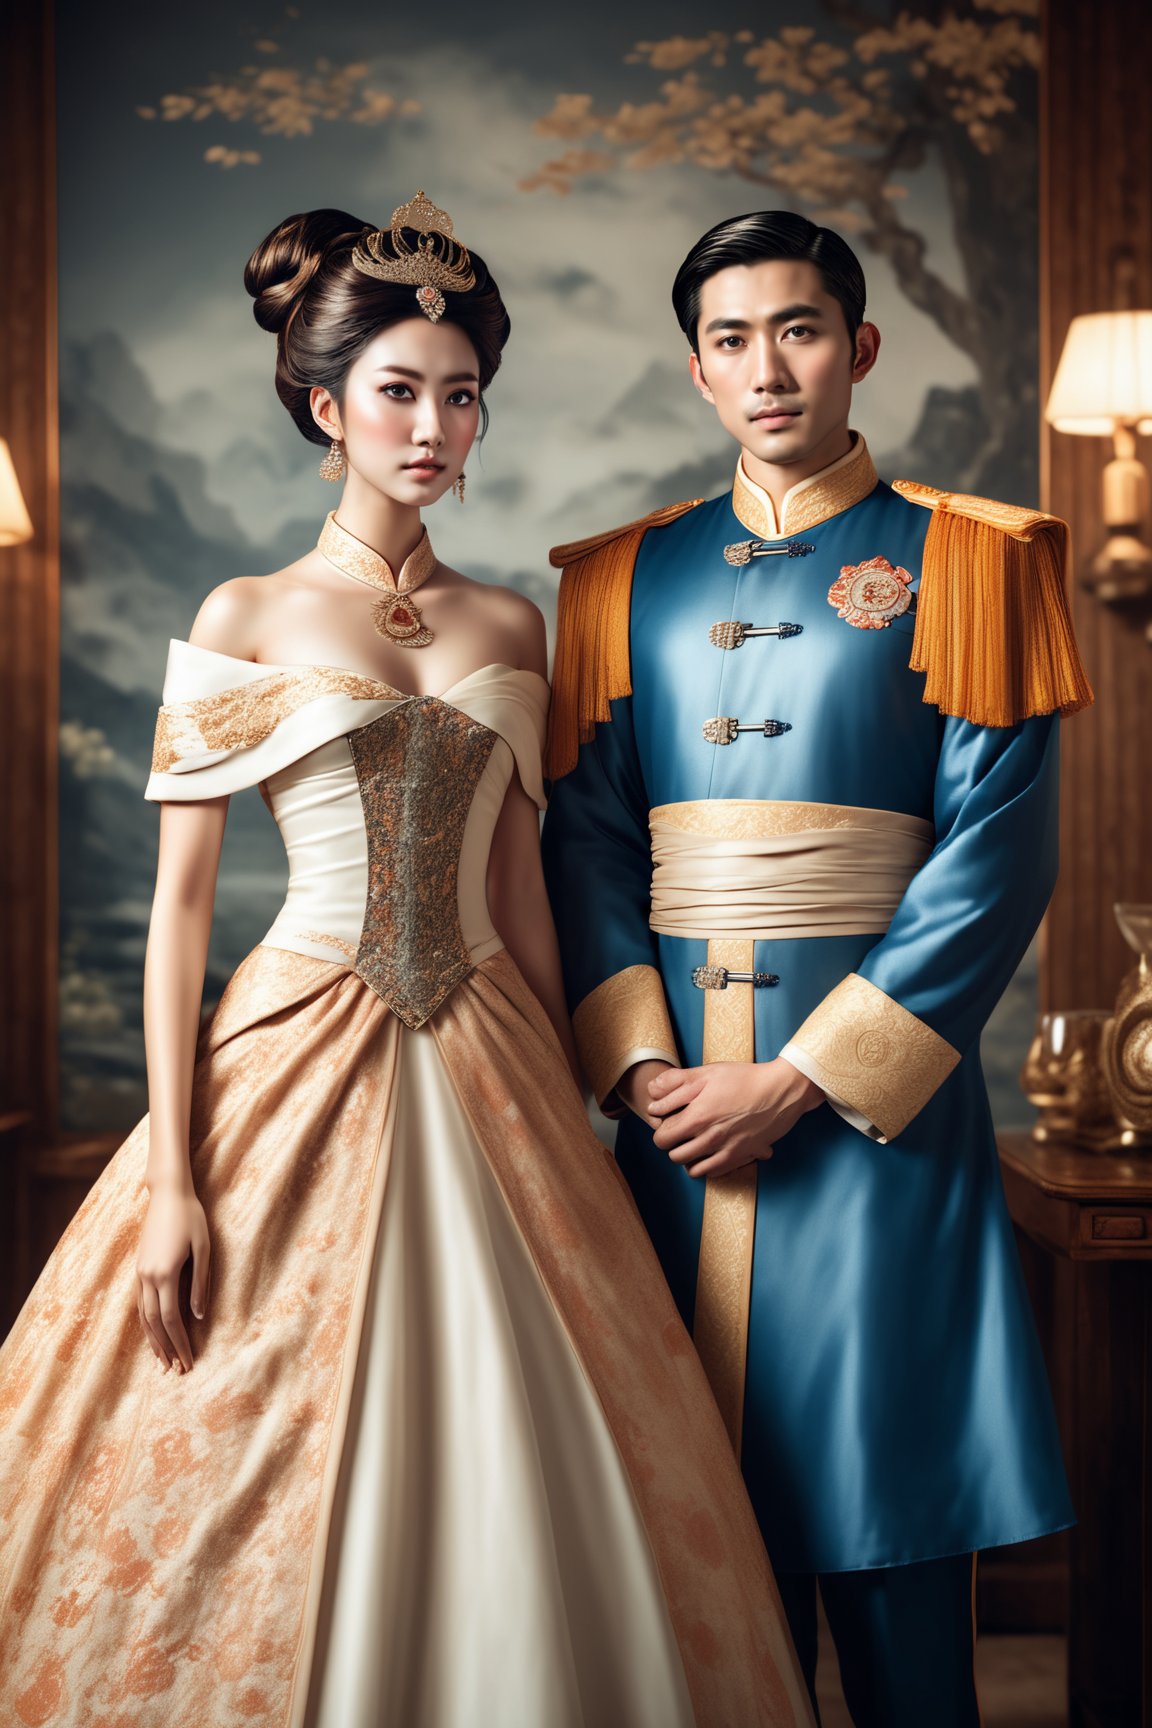 Extremely Realistic,  An emperor and a consort are portrayed in a scene filled with grandeur. The woman is stunningly beautiful, with youthful makeup and striking, moist large eyes, adorned with luxurious jewelry. The man, an ancient Chinese emperor, exudes a powerful, commanding presence reminiscent of Qin Shi Huang. He portrays an air of overwhelming authority and might. The scene is bright, emphasizing the nobility and majesty of both figures. Key features include the consort’s captivating beauty and radiant eyes, her elegant jewelry, the emperor’s formidable and imperial aura, and the overall luminous and regal atmosphere. vintage polaroid aesthetic,  grainy,  noisy,  gritty,  grunge,  80s rock vibe. Extremely Realistic, photo r3al, r4w photo, vintagepaper, old style,old style,vintagepaper,Enhanced All,Pure Beauty,Surreal photography ,Truly Female Beauty